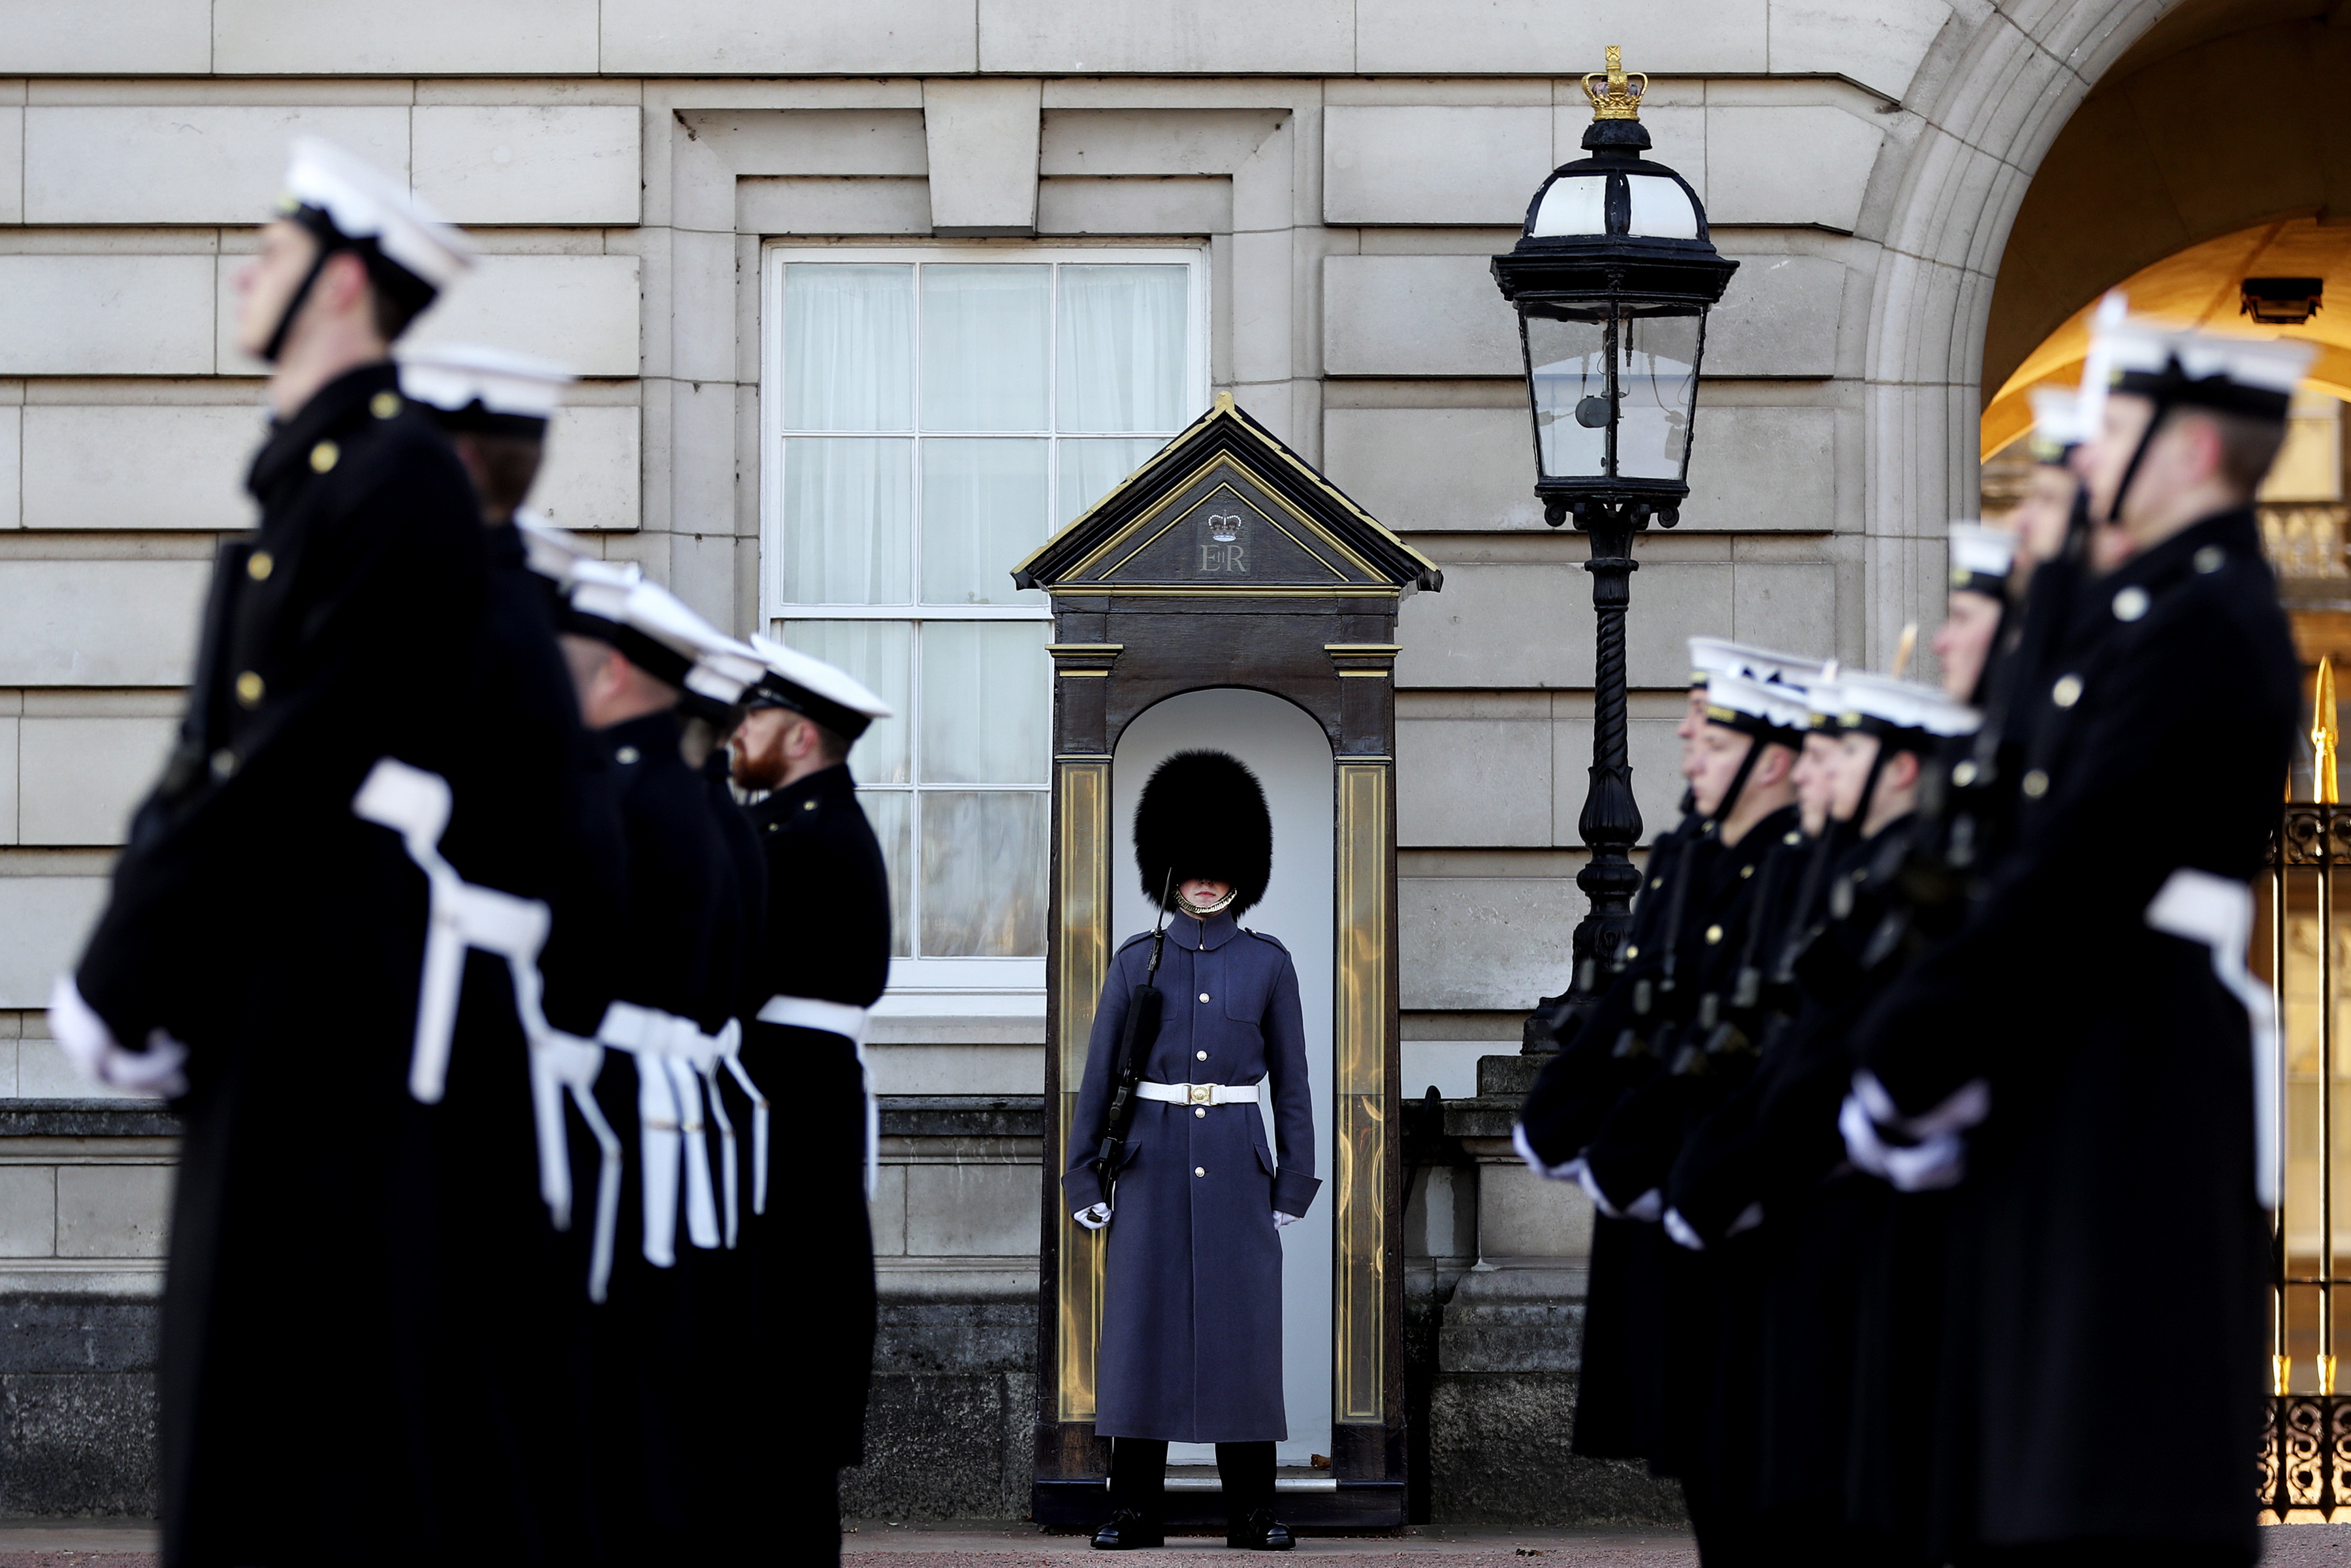 Royal Navy performs changing of the guard ceremony